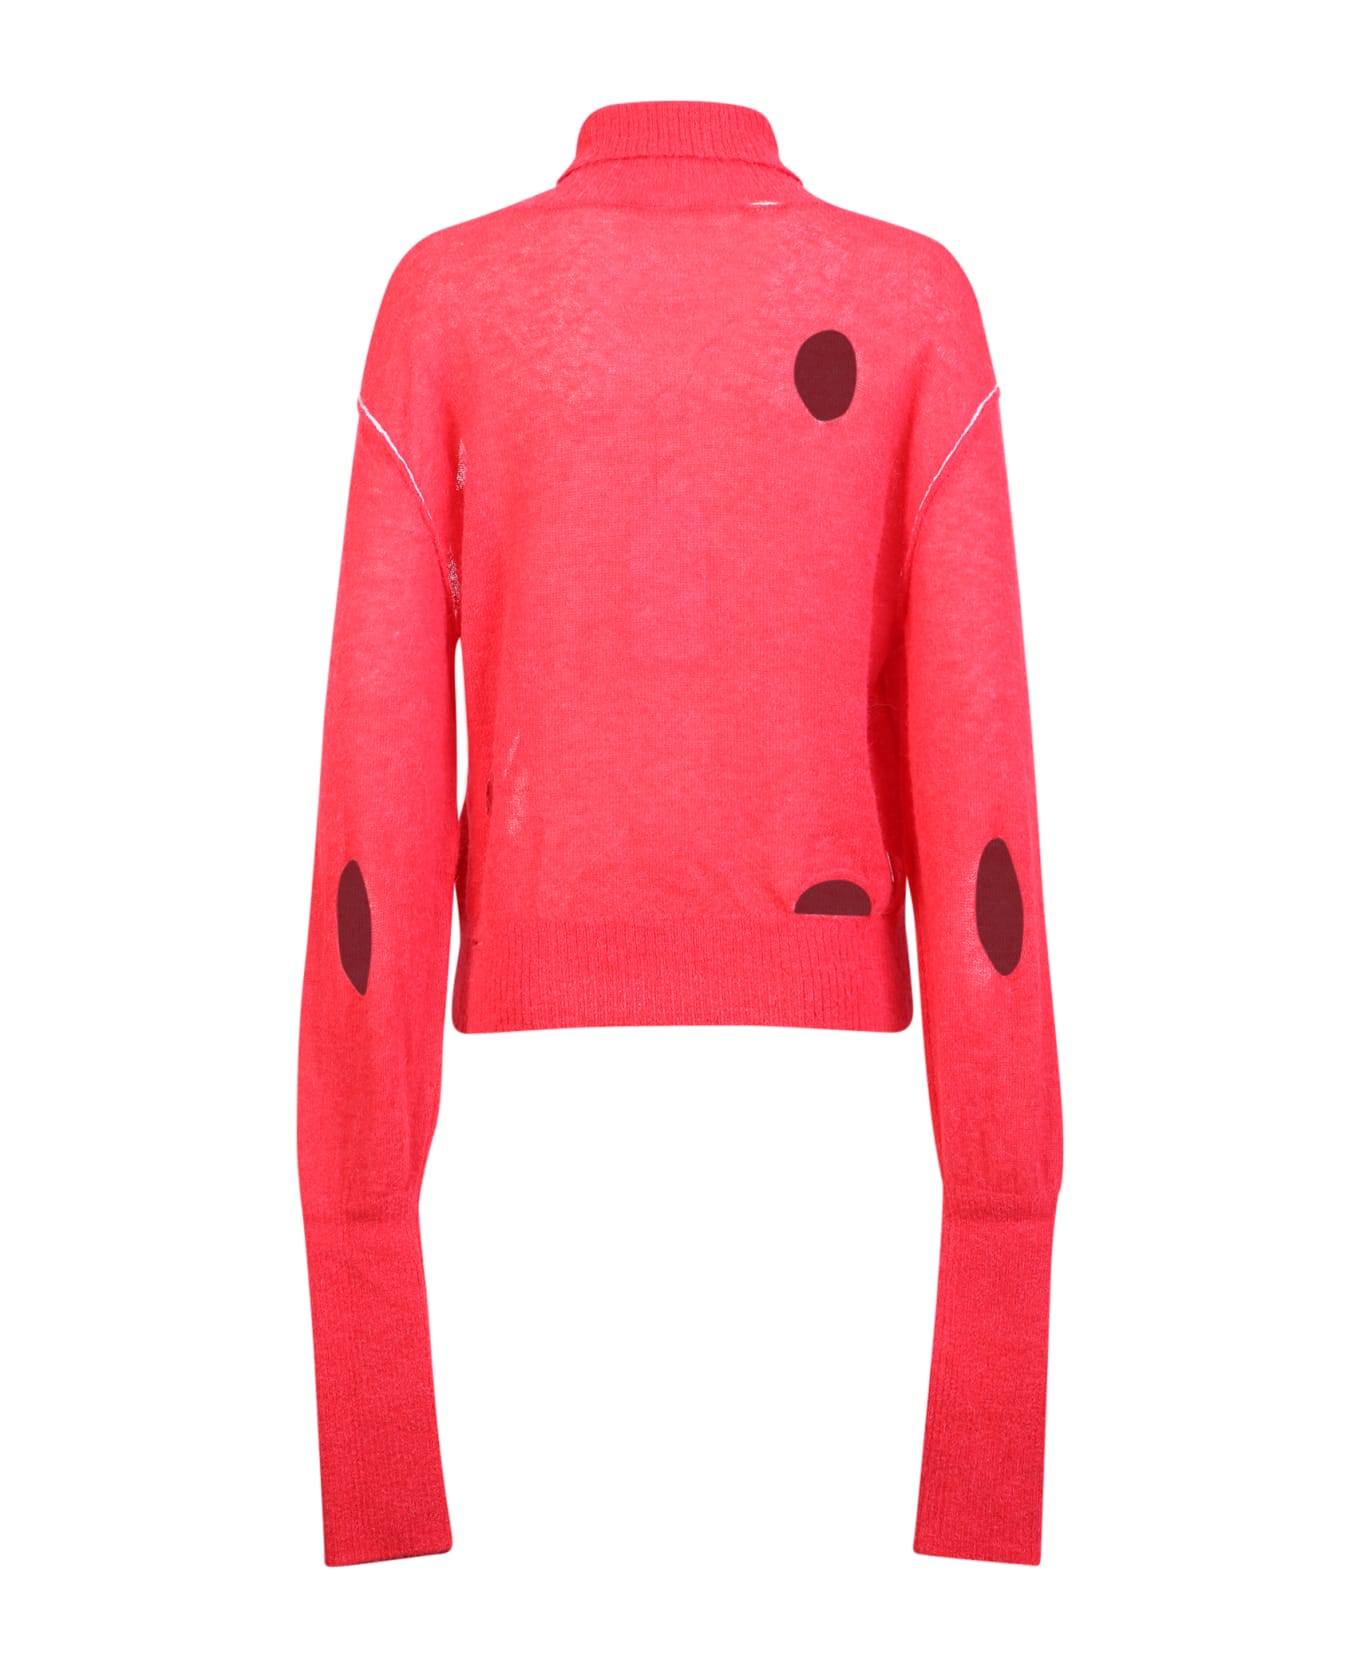 MM6 Maison Margiela High Neck Pullover With Worn Effect Red - Red